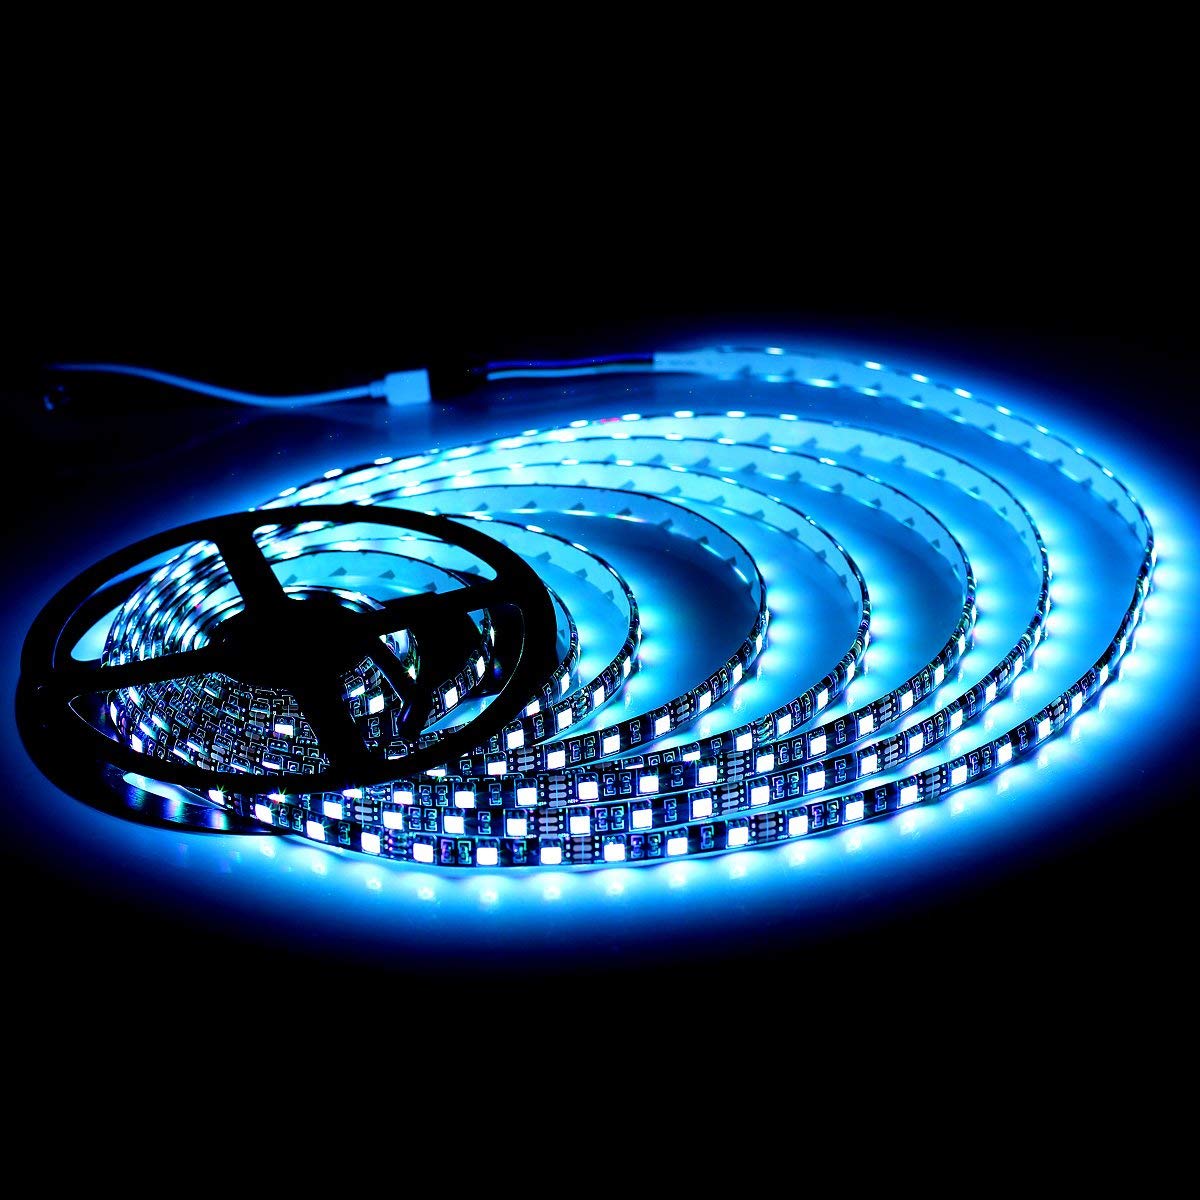 SUPERNIGHT 16.4ft 5050 RGB Strip Waterproof Black PCB, 300 LED Color Changing Rope Lights